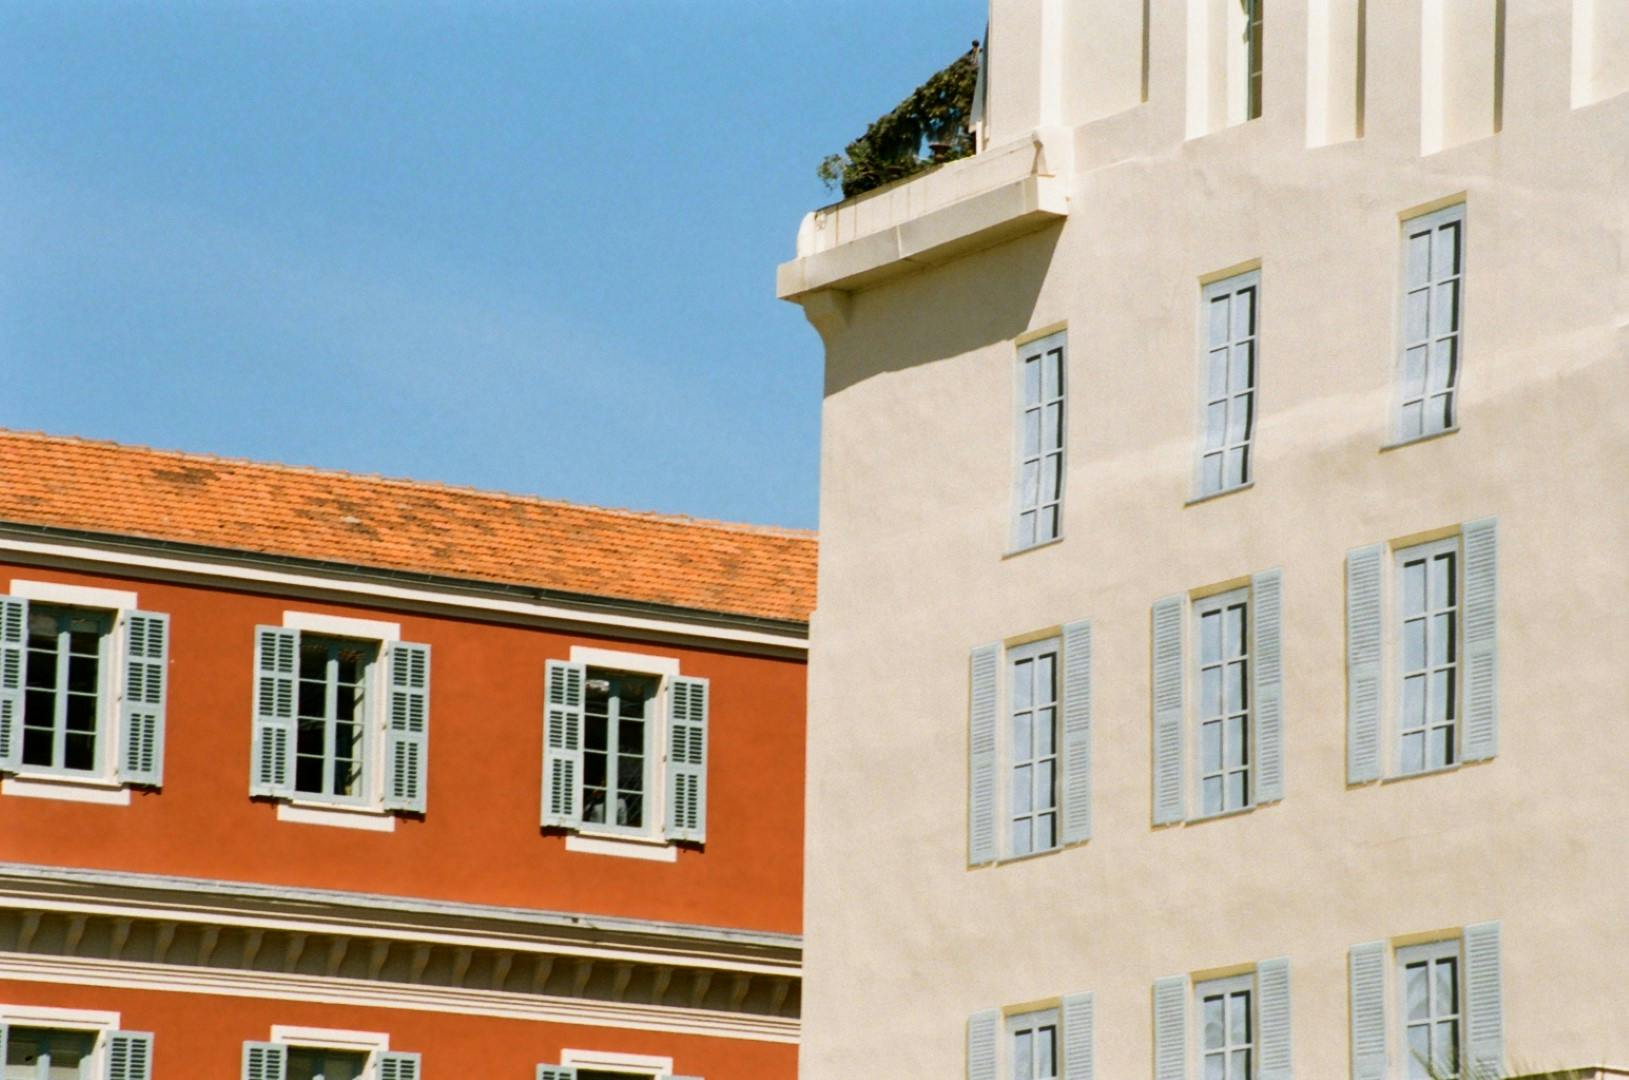 Architecture in Nice, France